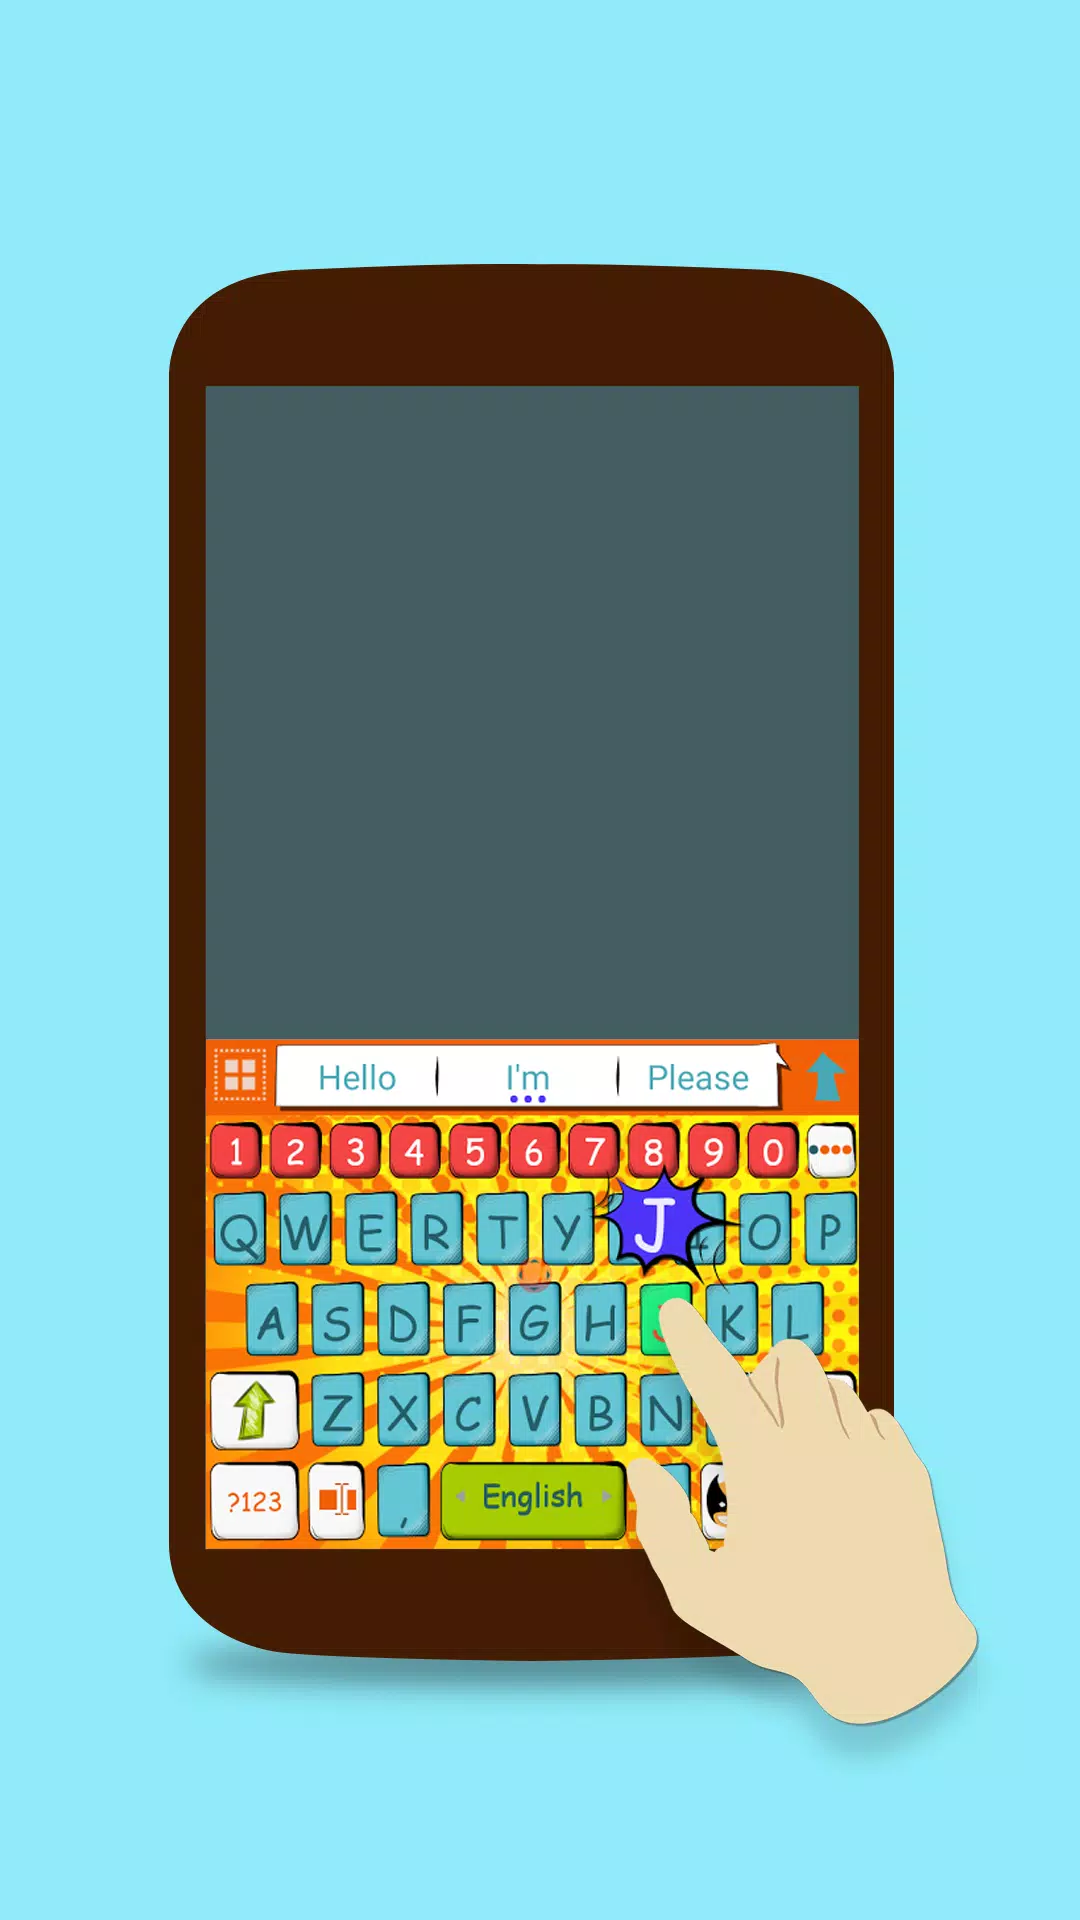 ai.keyboard Comic Book theme for Android - APK Download